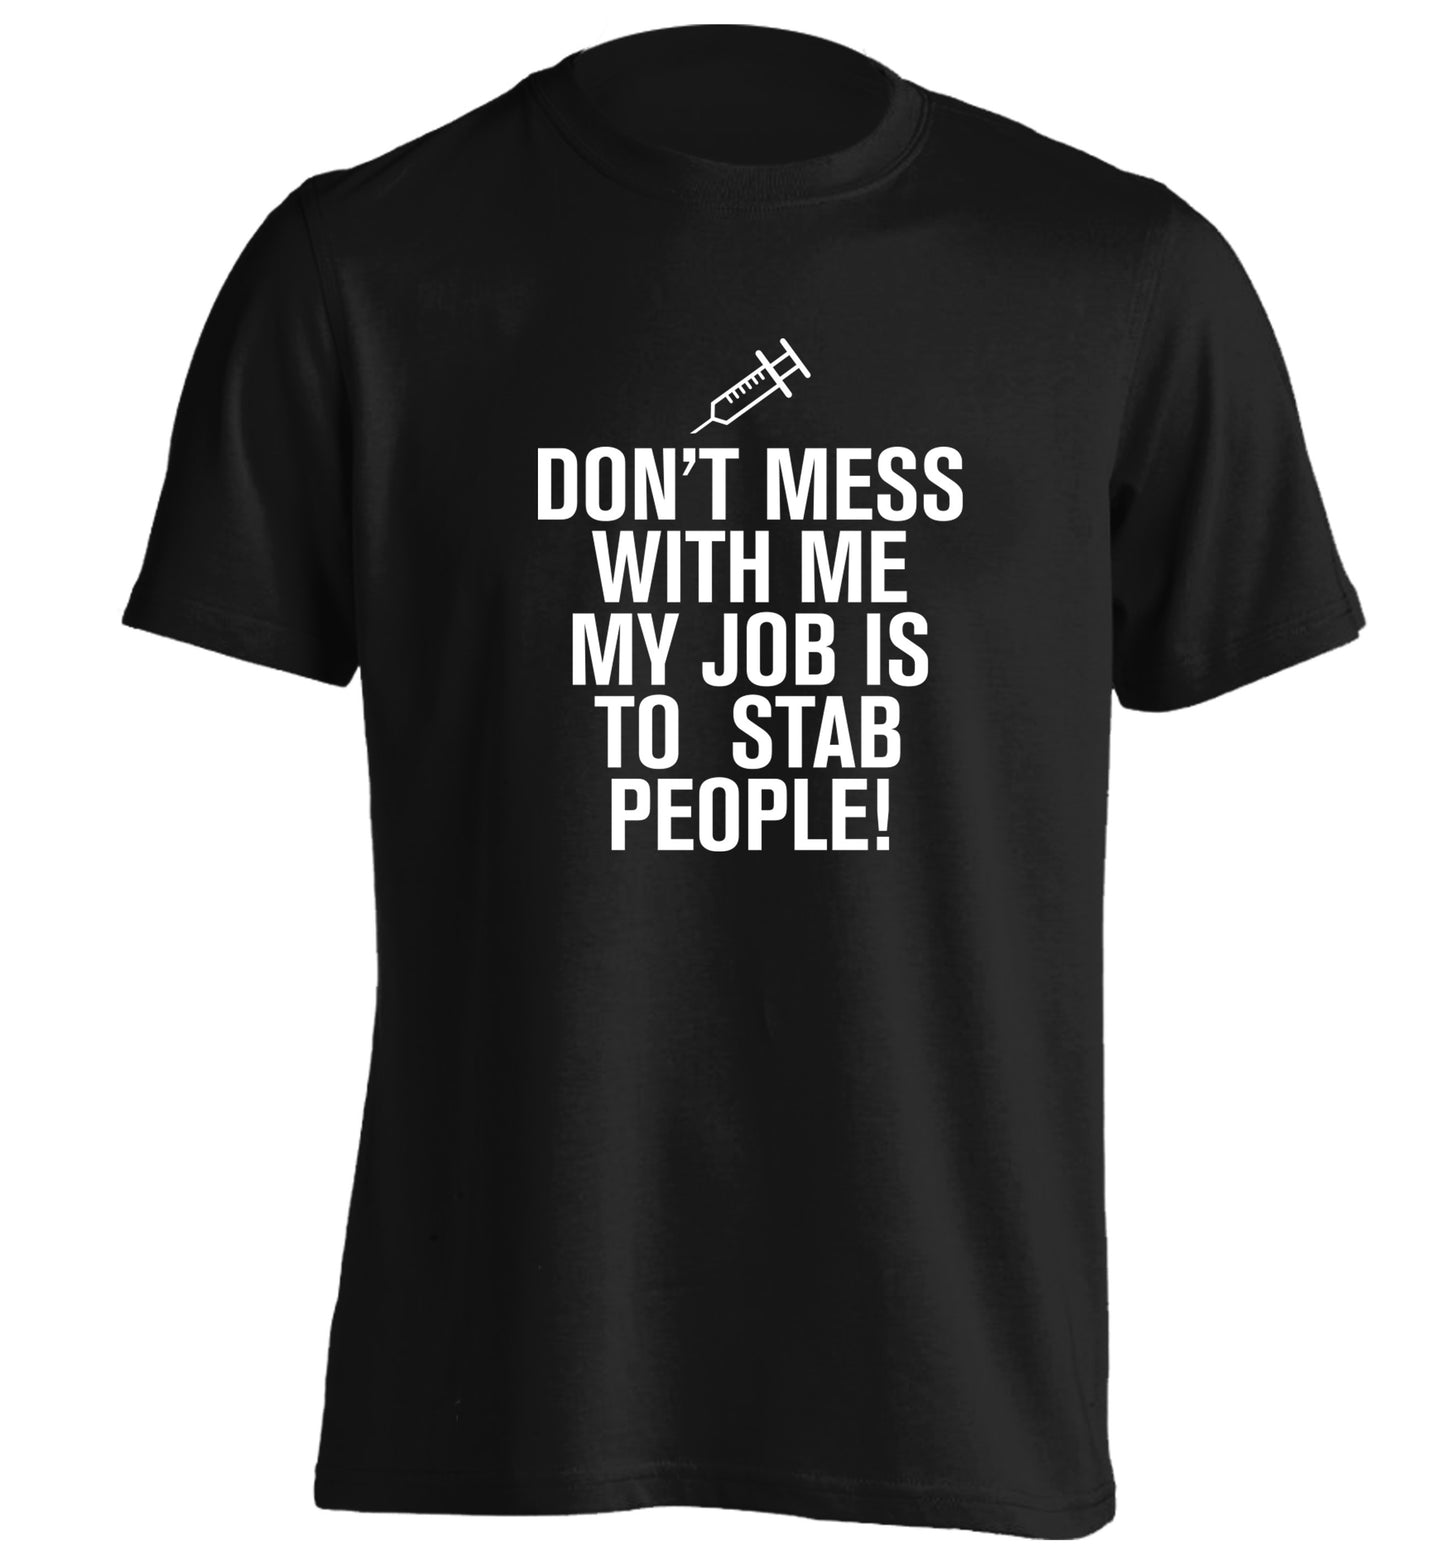 Don't mess with me my job is to stab people! adults unisex black Tshirt 2XL